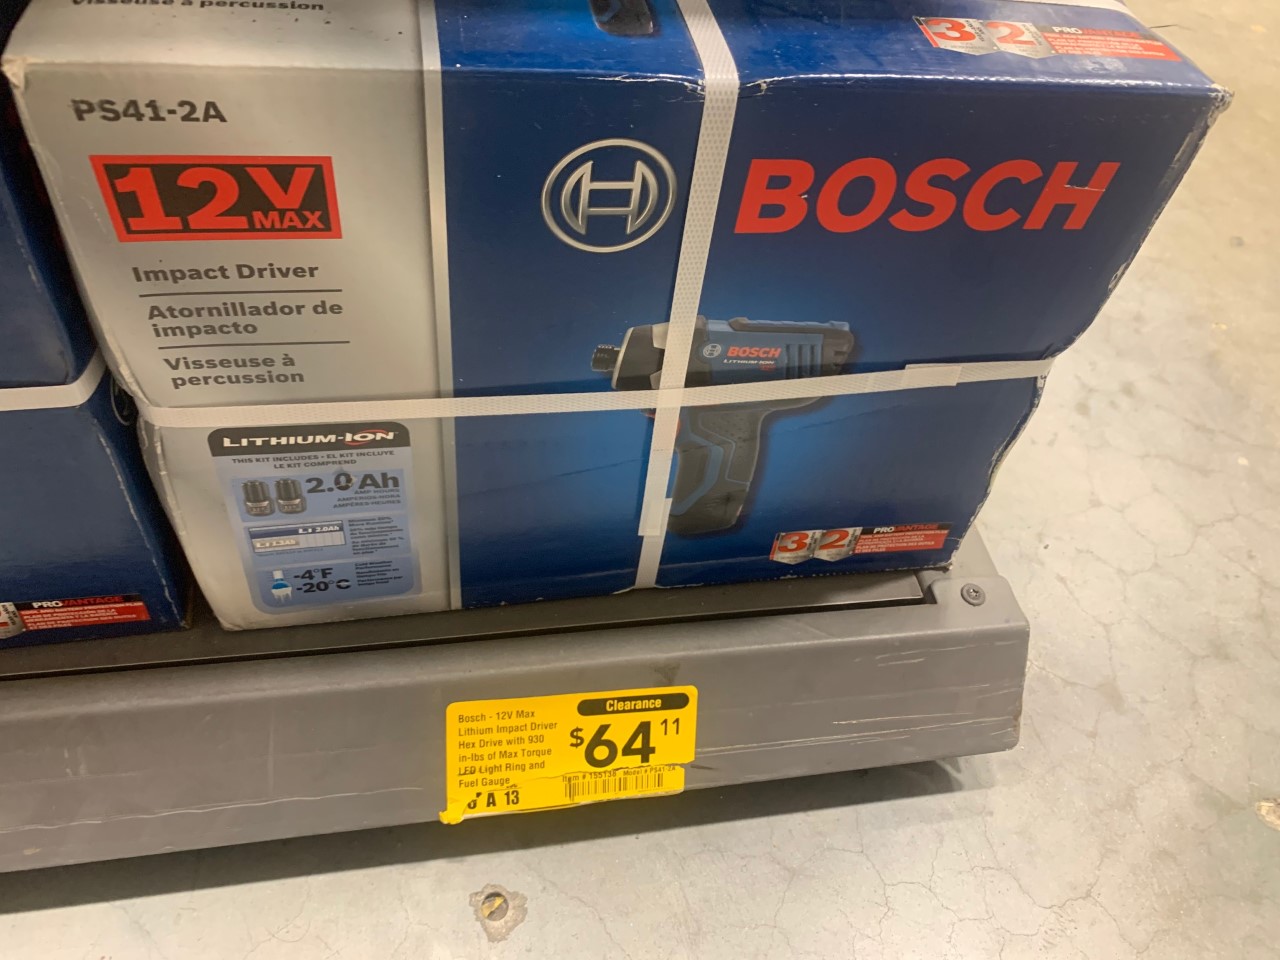 Bosch Impact Driver - Clearance InStore Only! $64.11